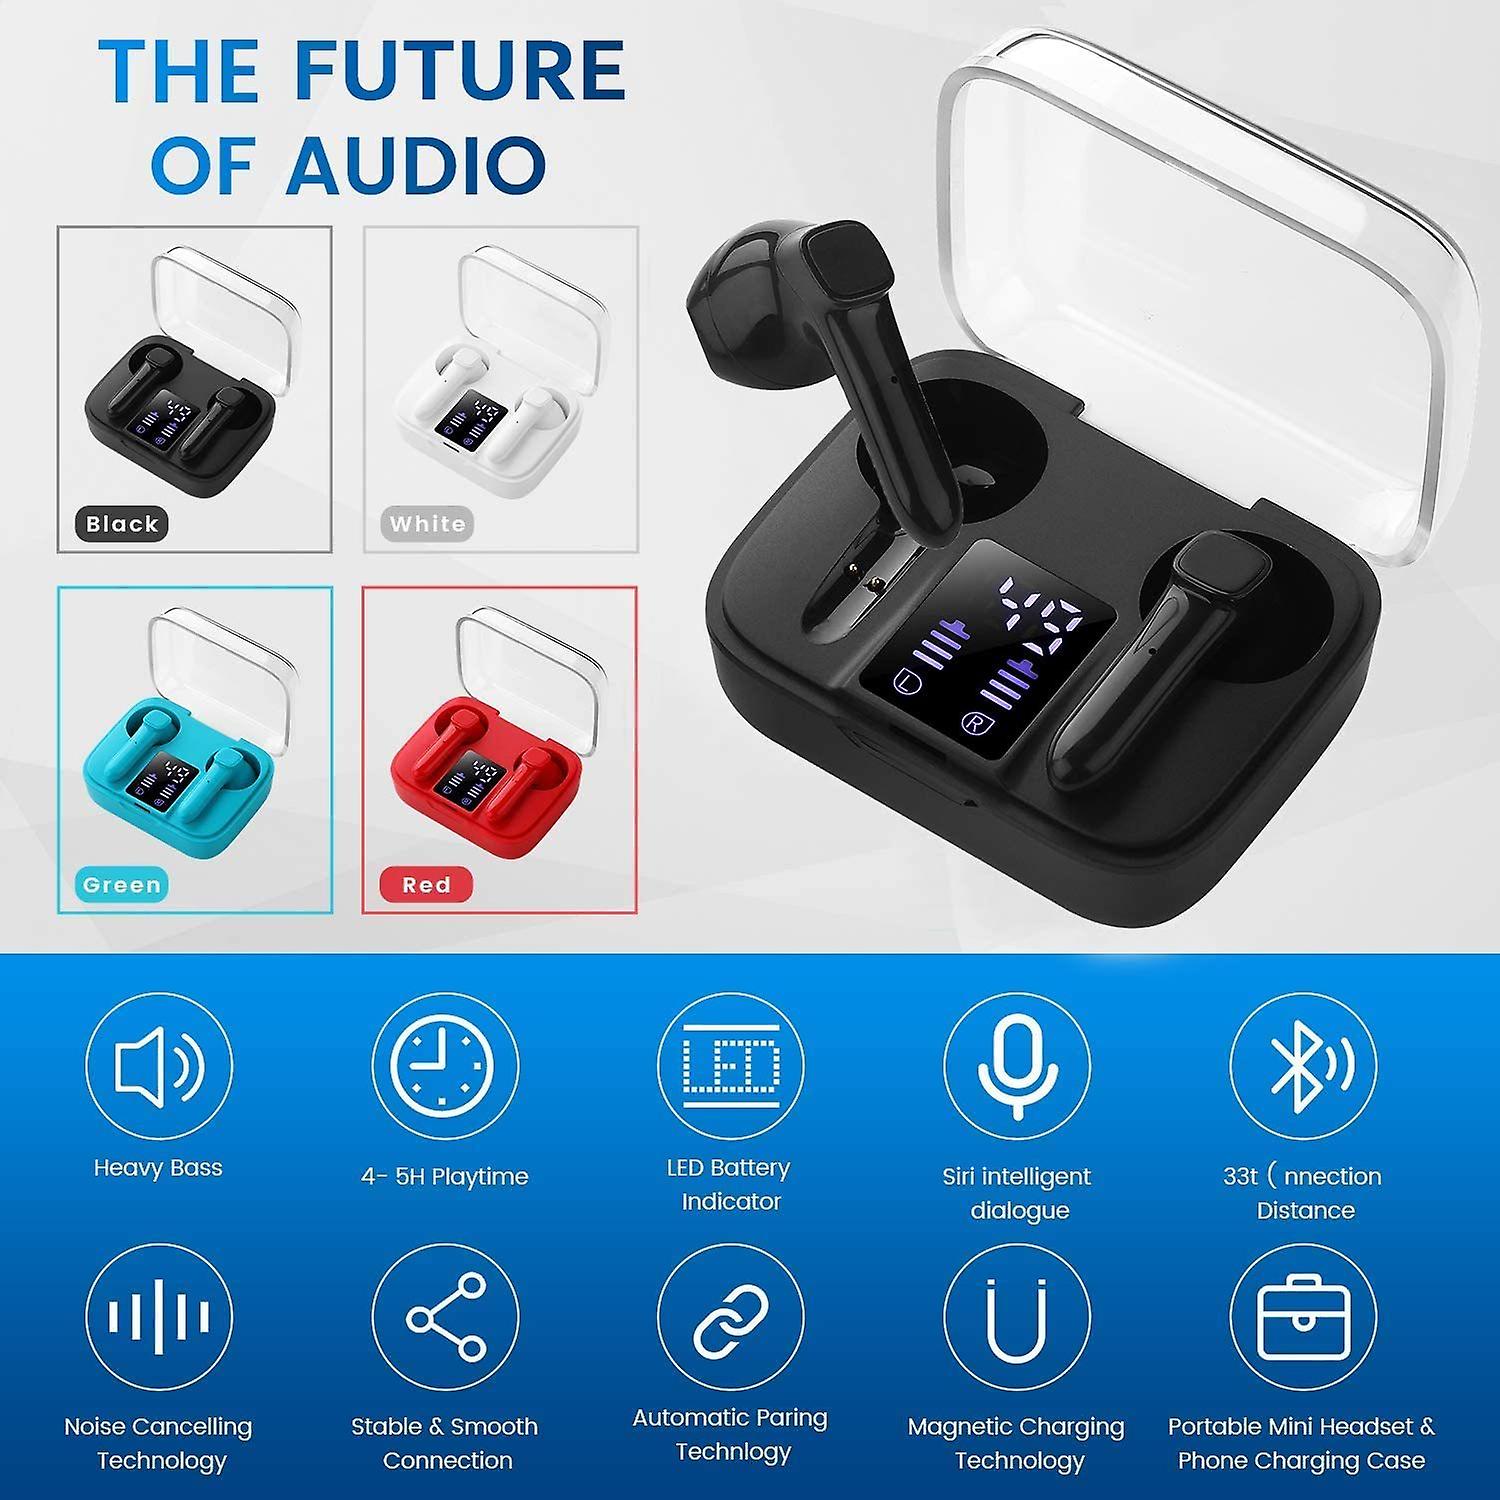 Bluetooth headphones， wireless headphones with stereo sound， Bluetooth 5.0 headset， wireless in ear earphones with microphone and mini portable charging case(black)